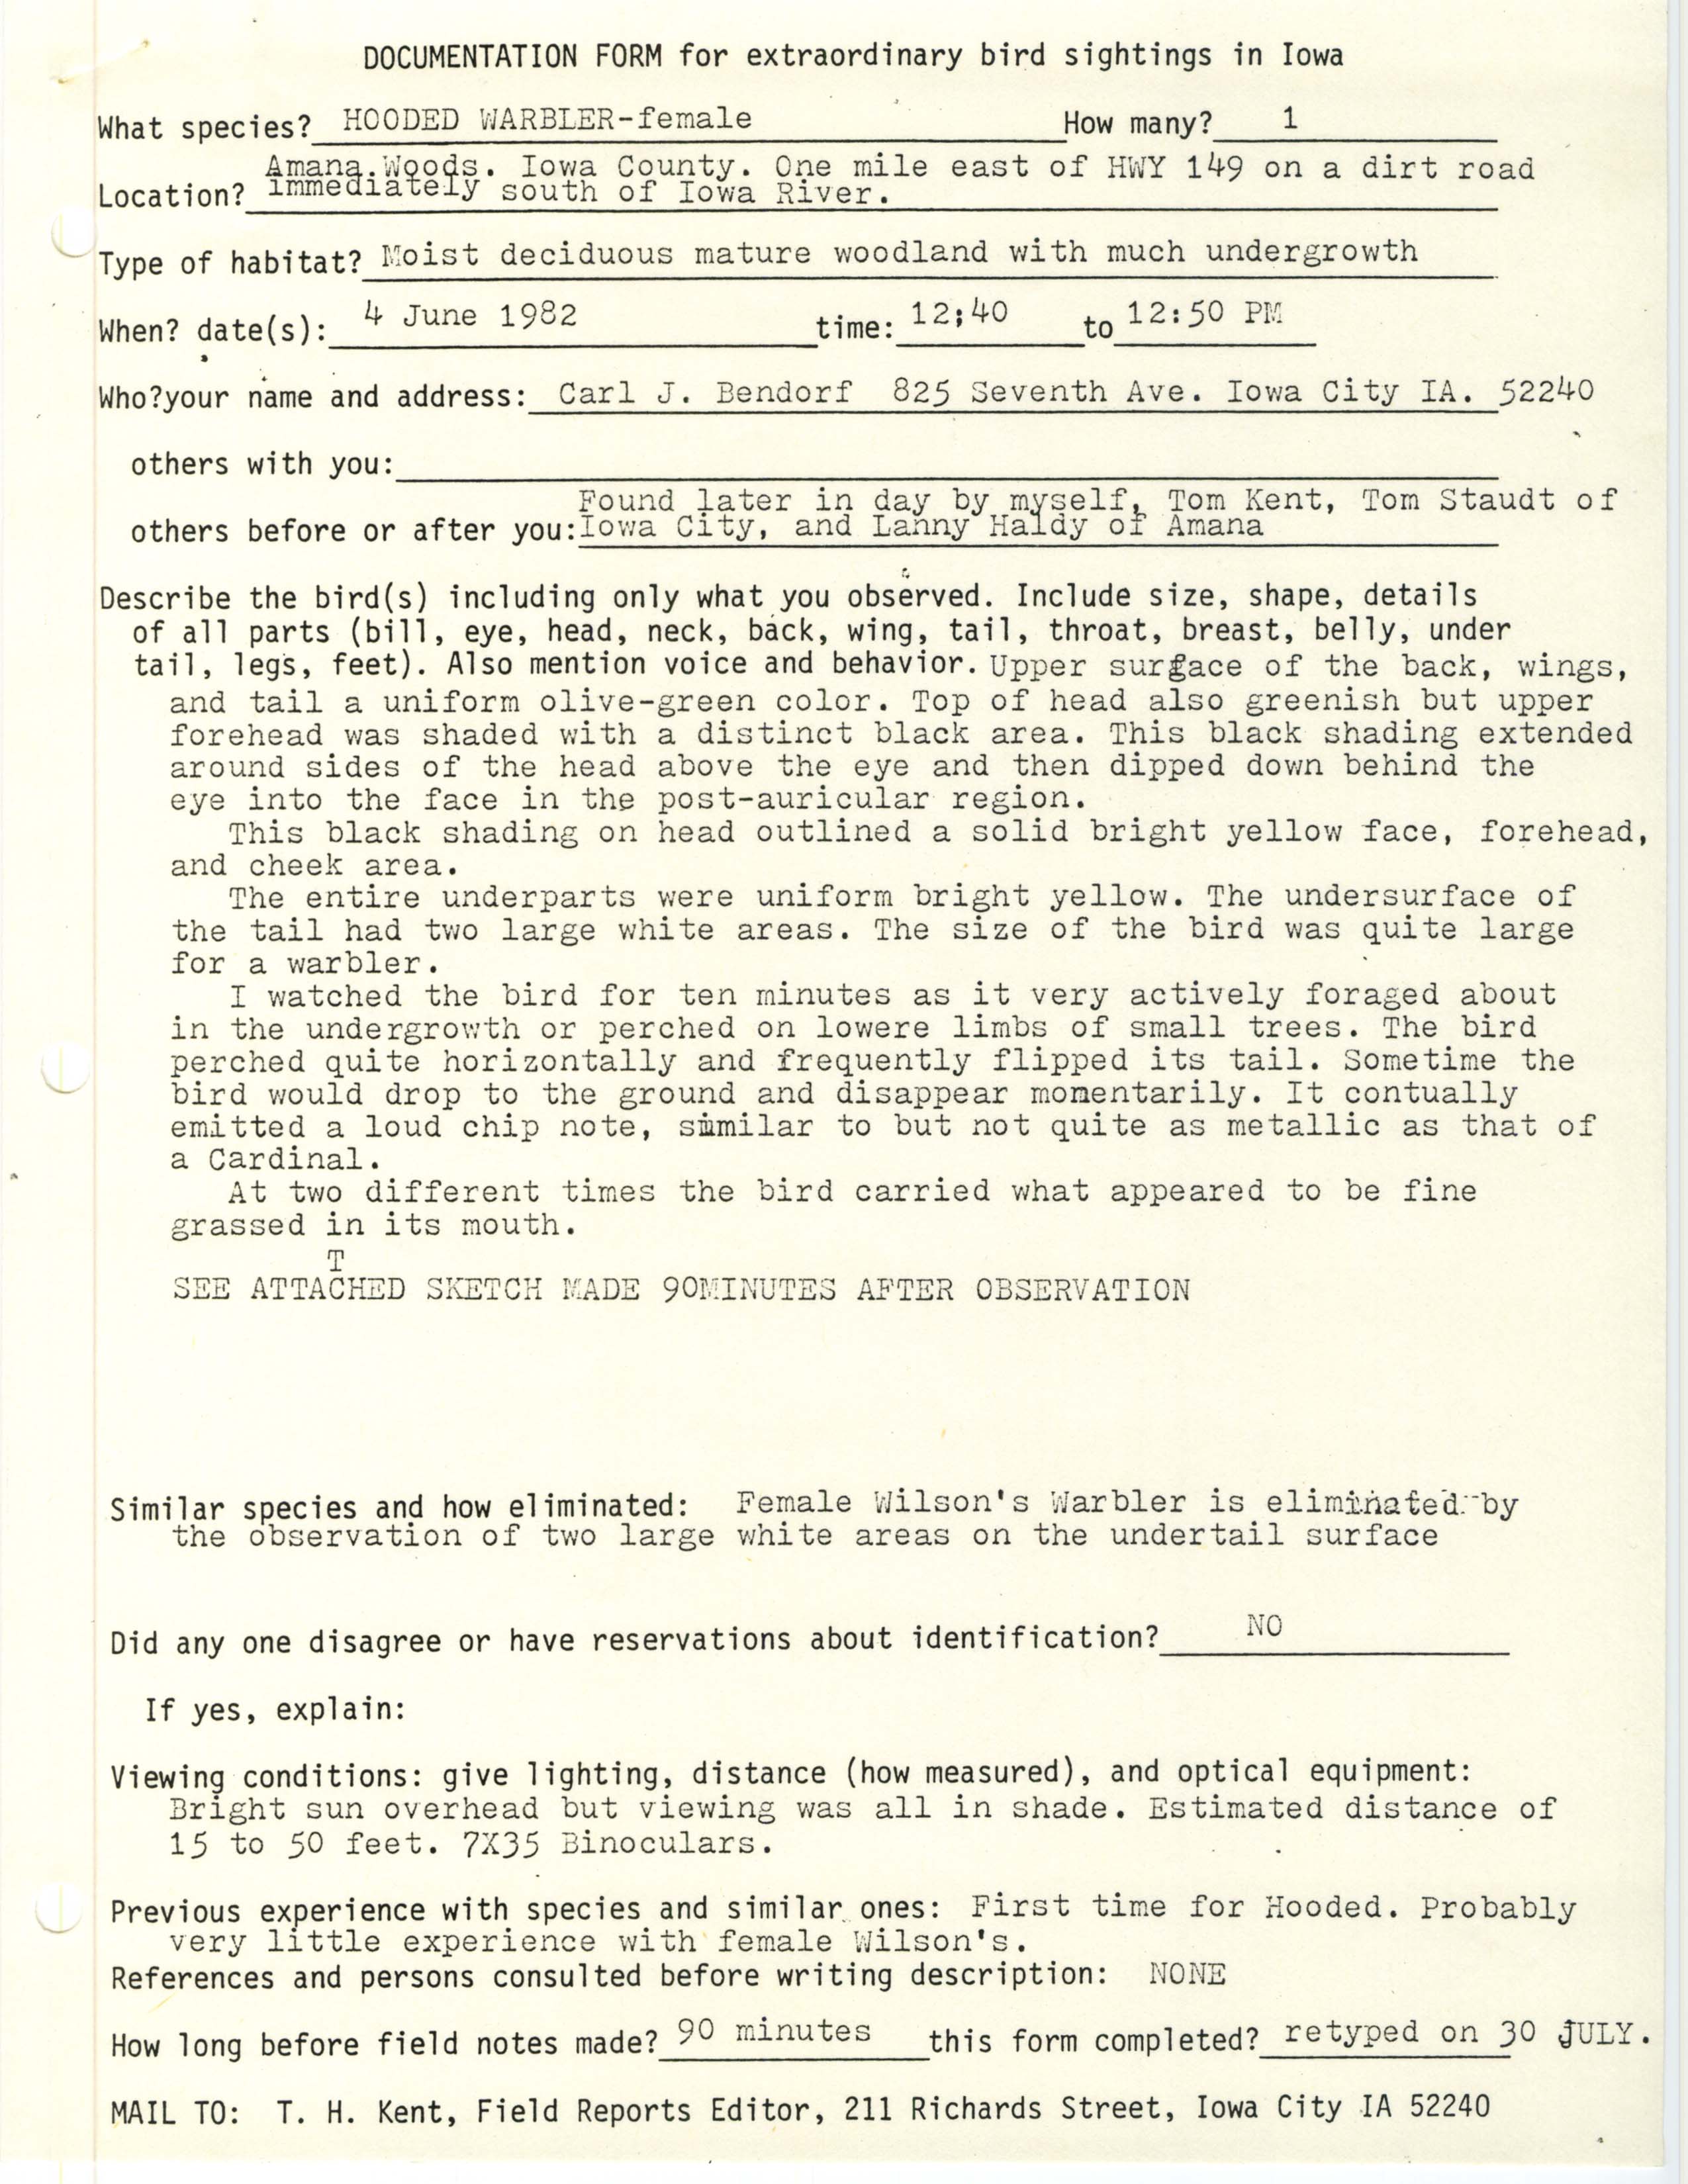 Rare bird documentation form for Hooded Warbler at Amana Woods, 1982